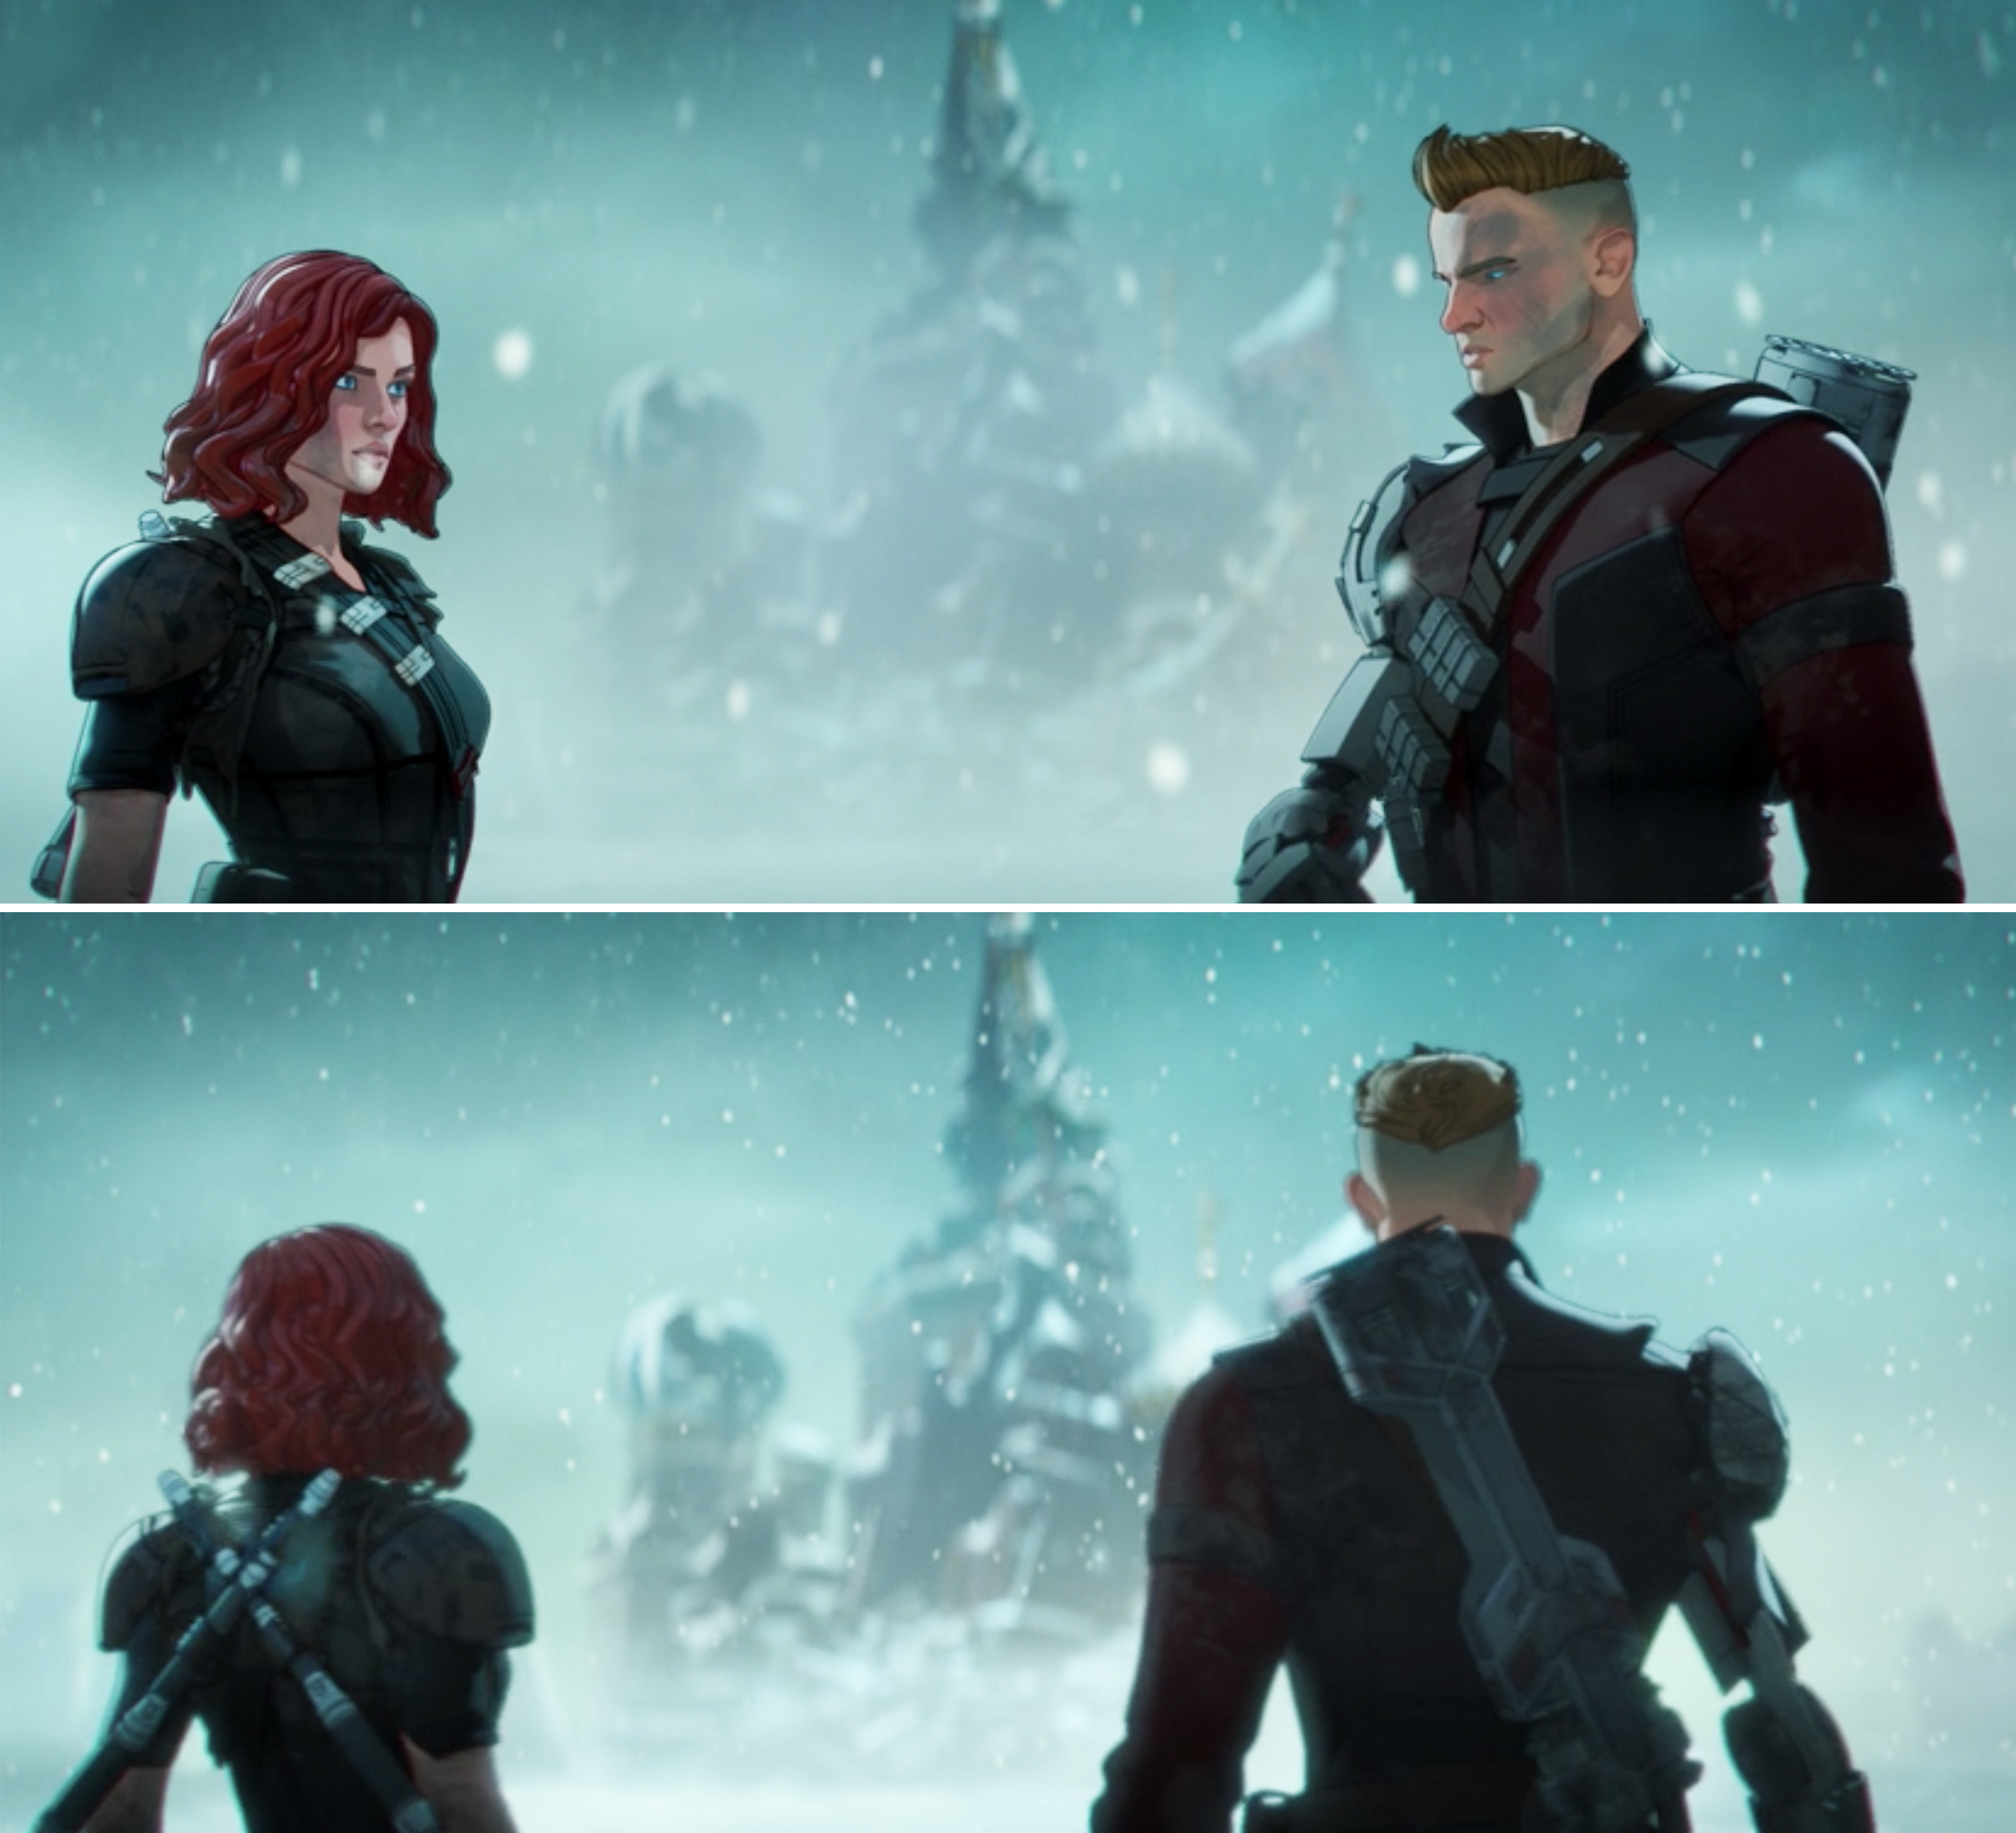 Black Widow and Hawkeye standing face to face